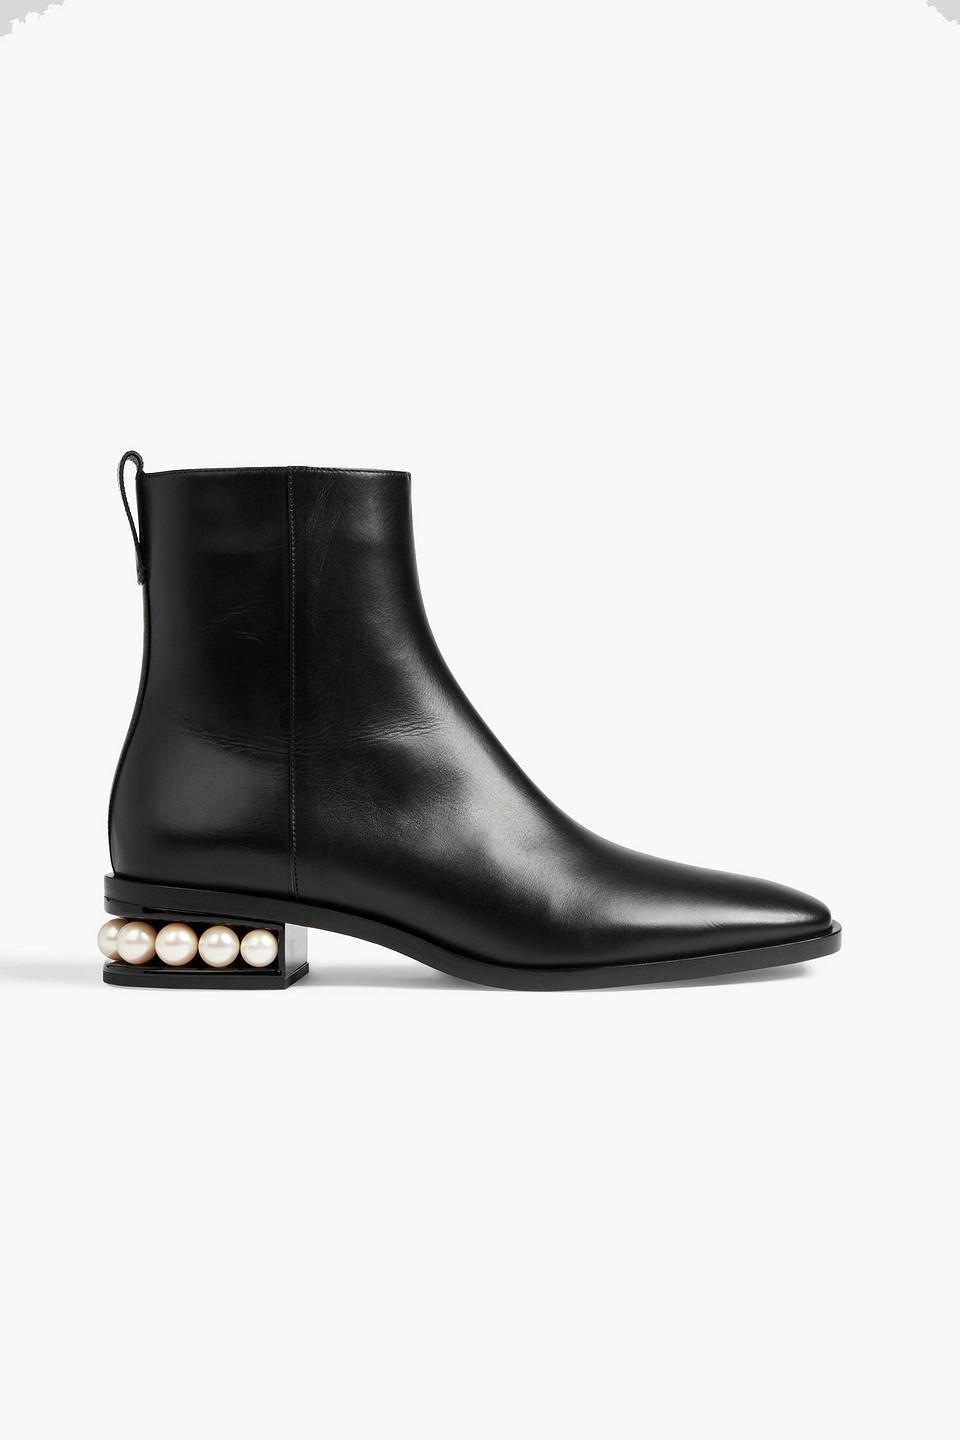 30mm Casati Ankle Boots